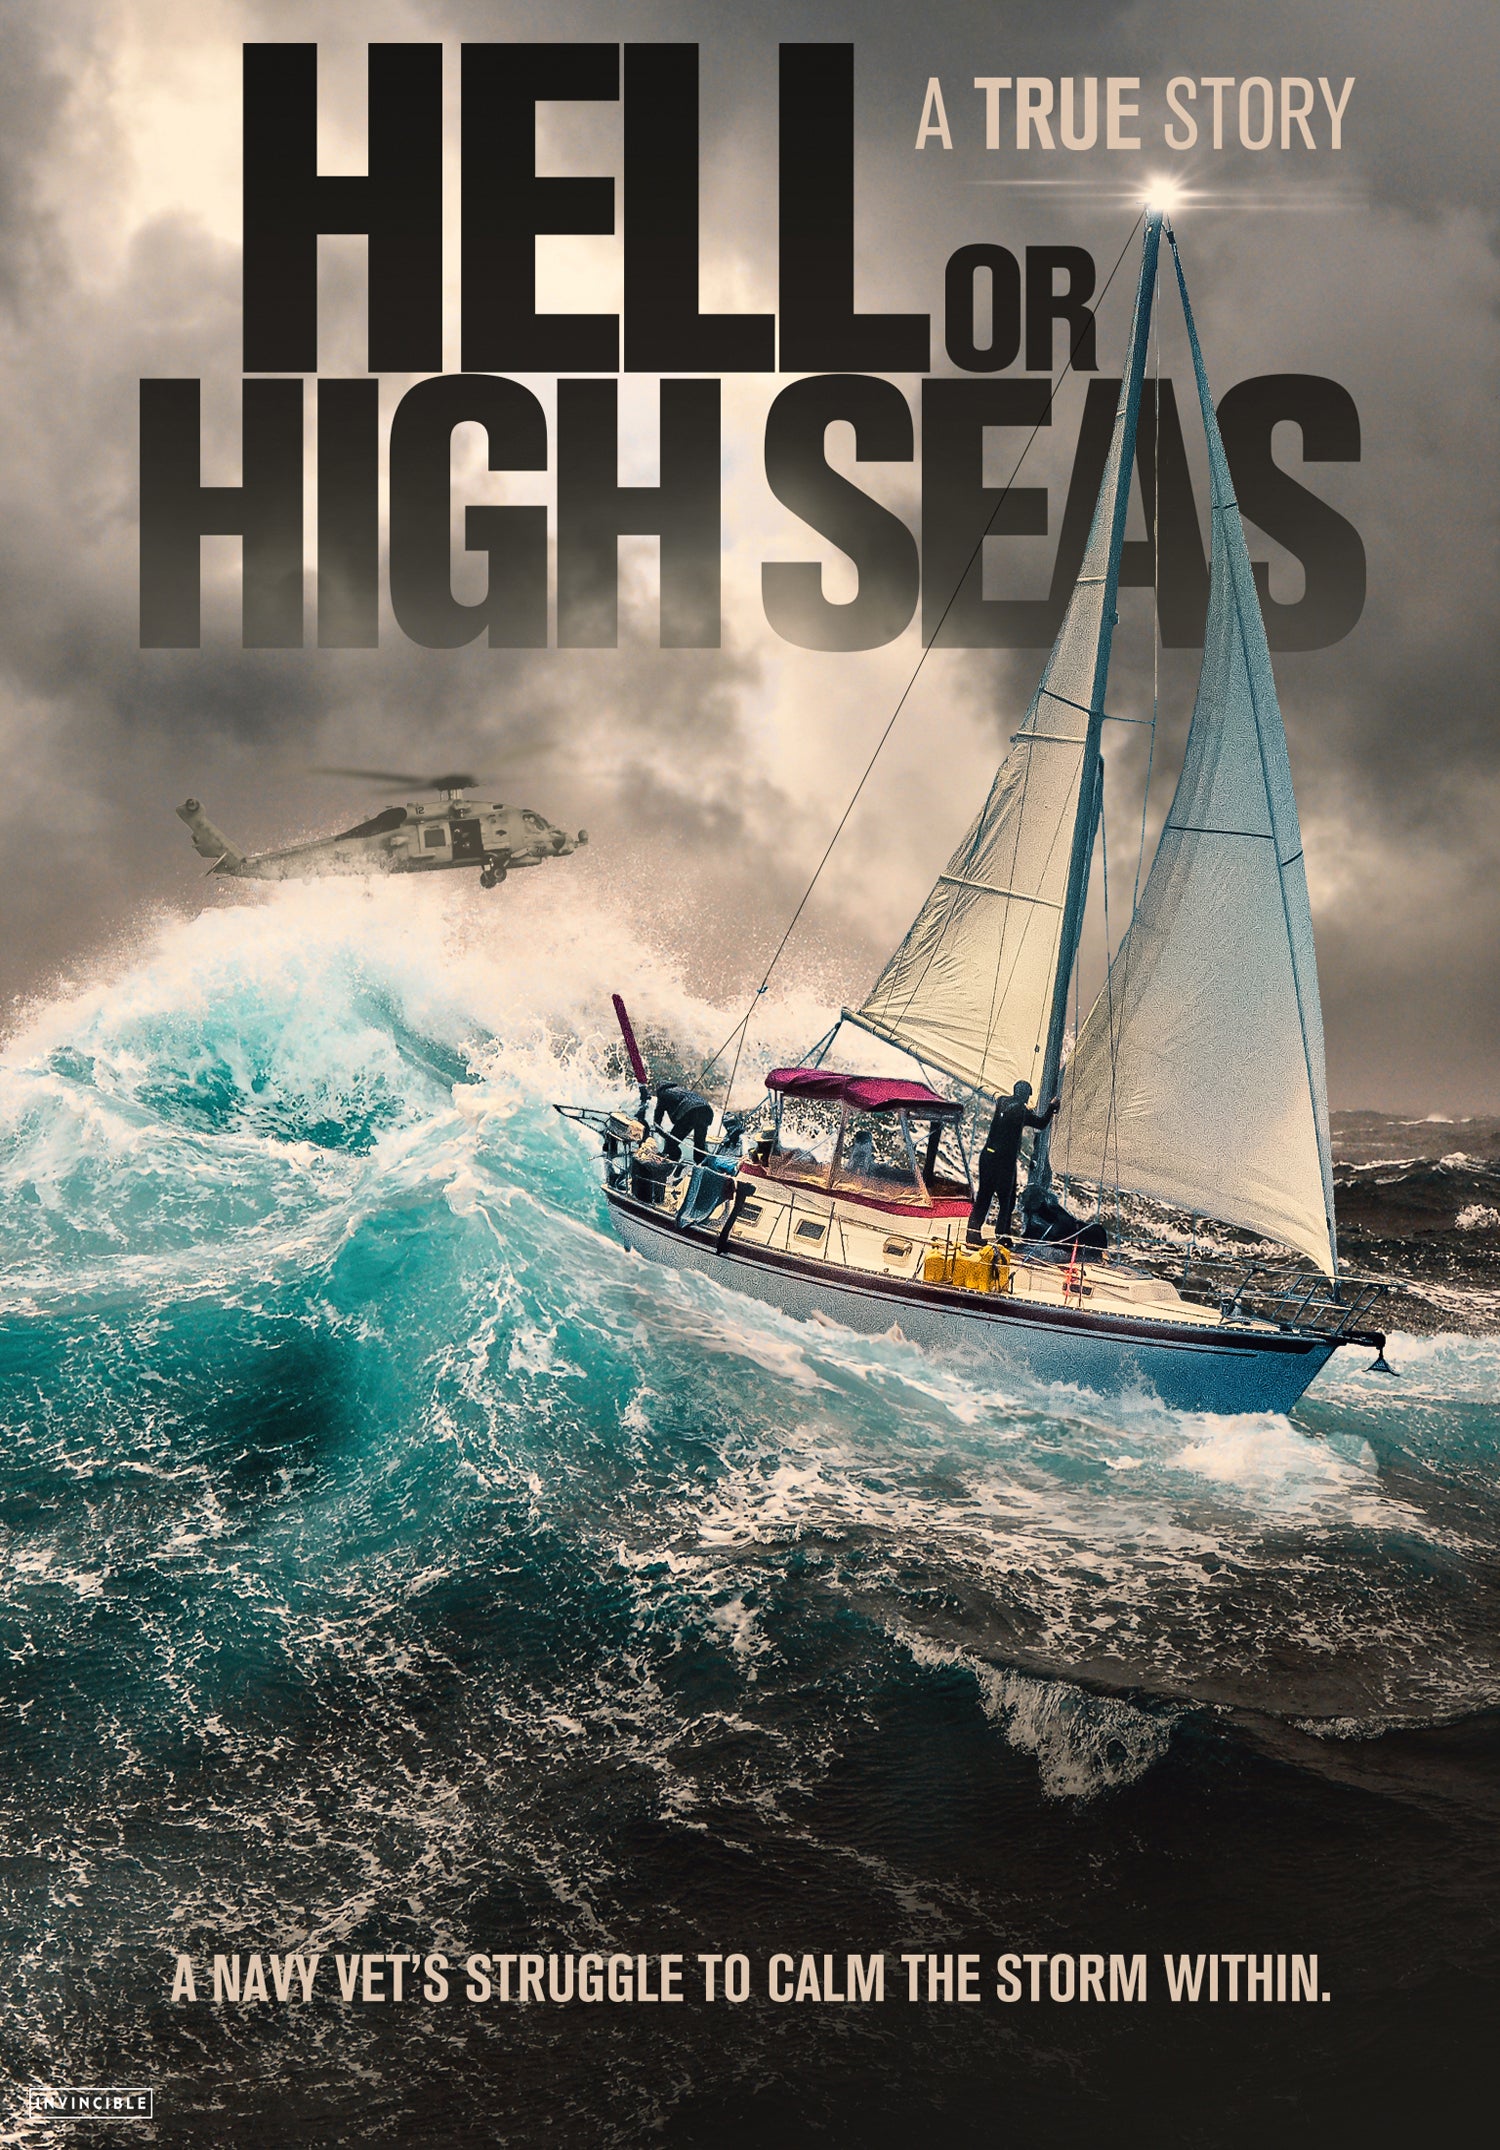 Hell or High Seas cover art